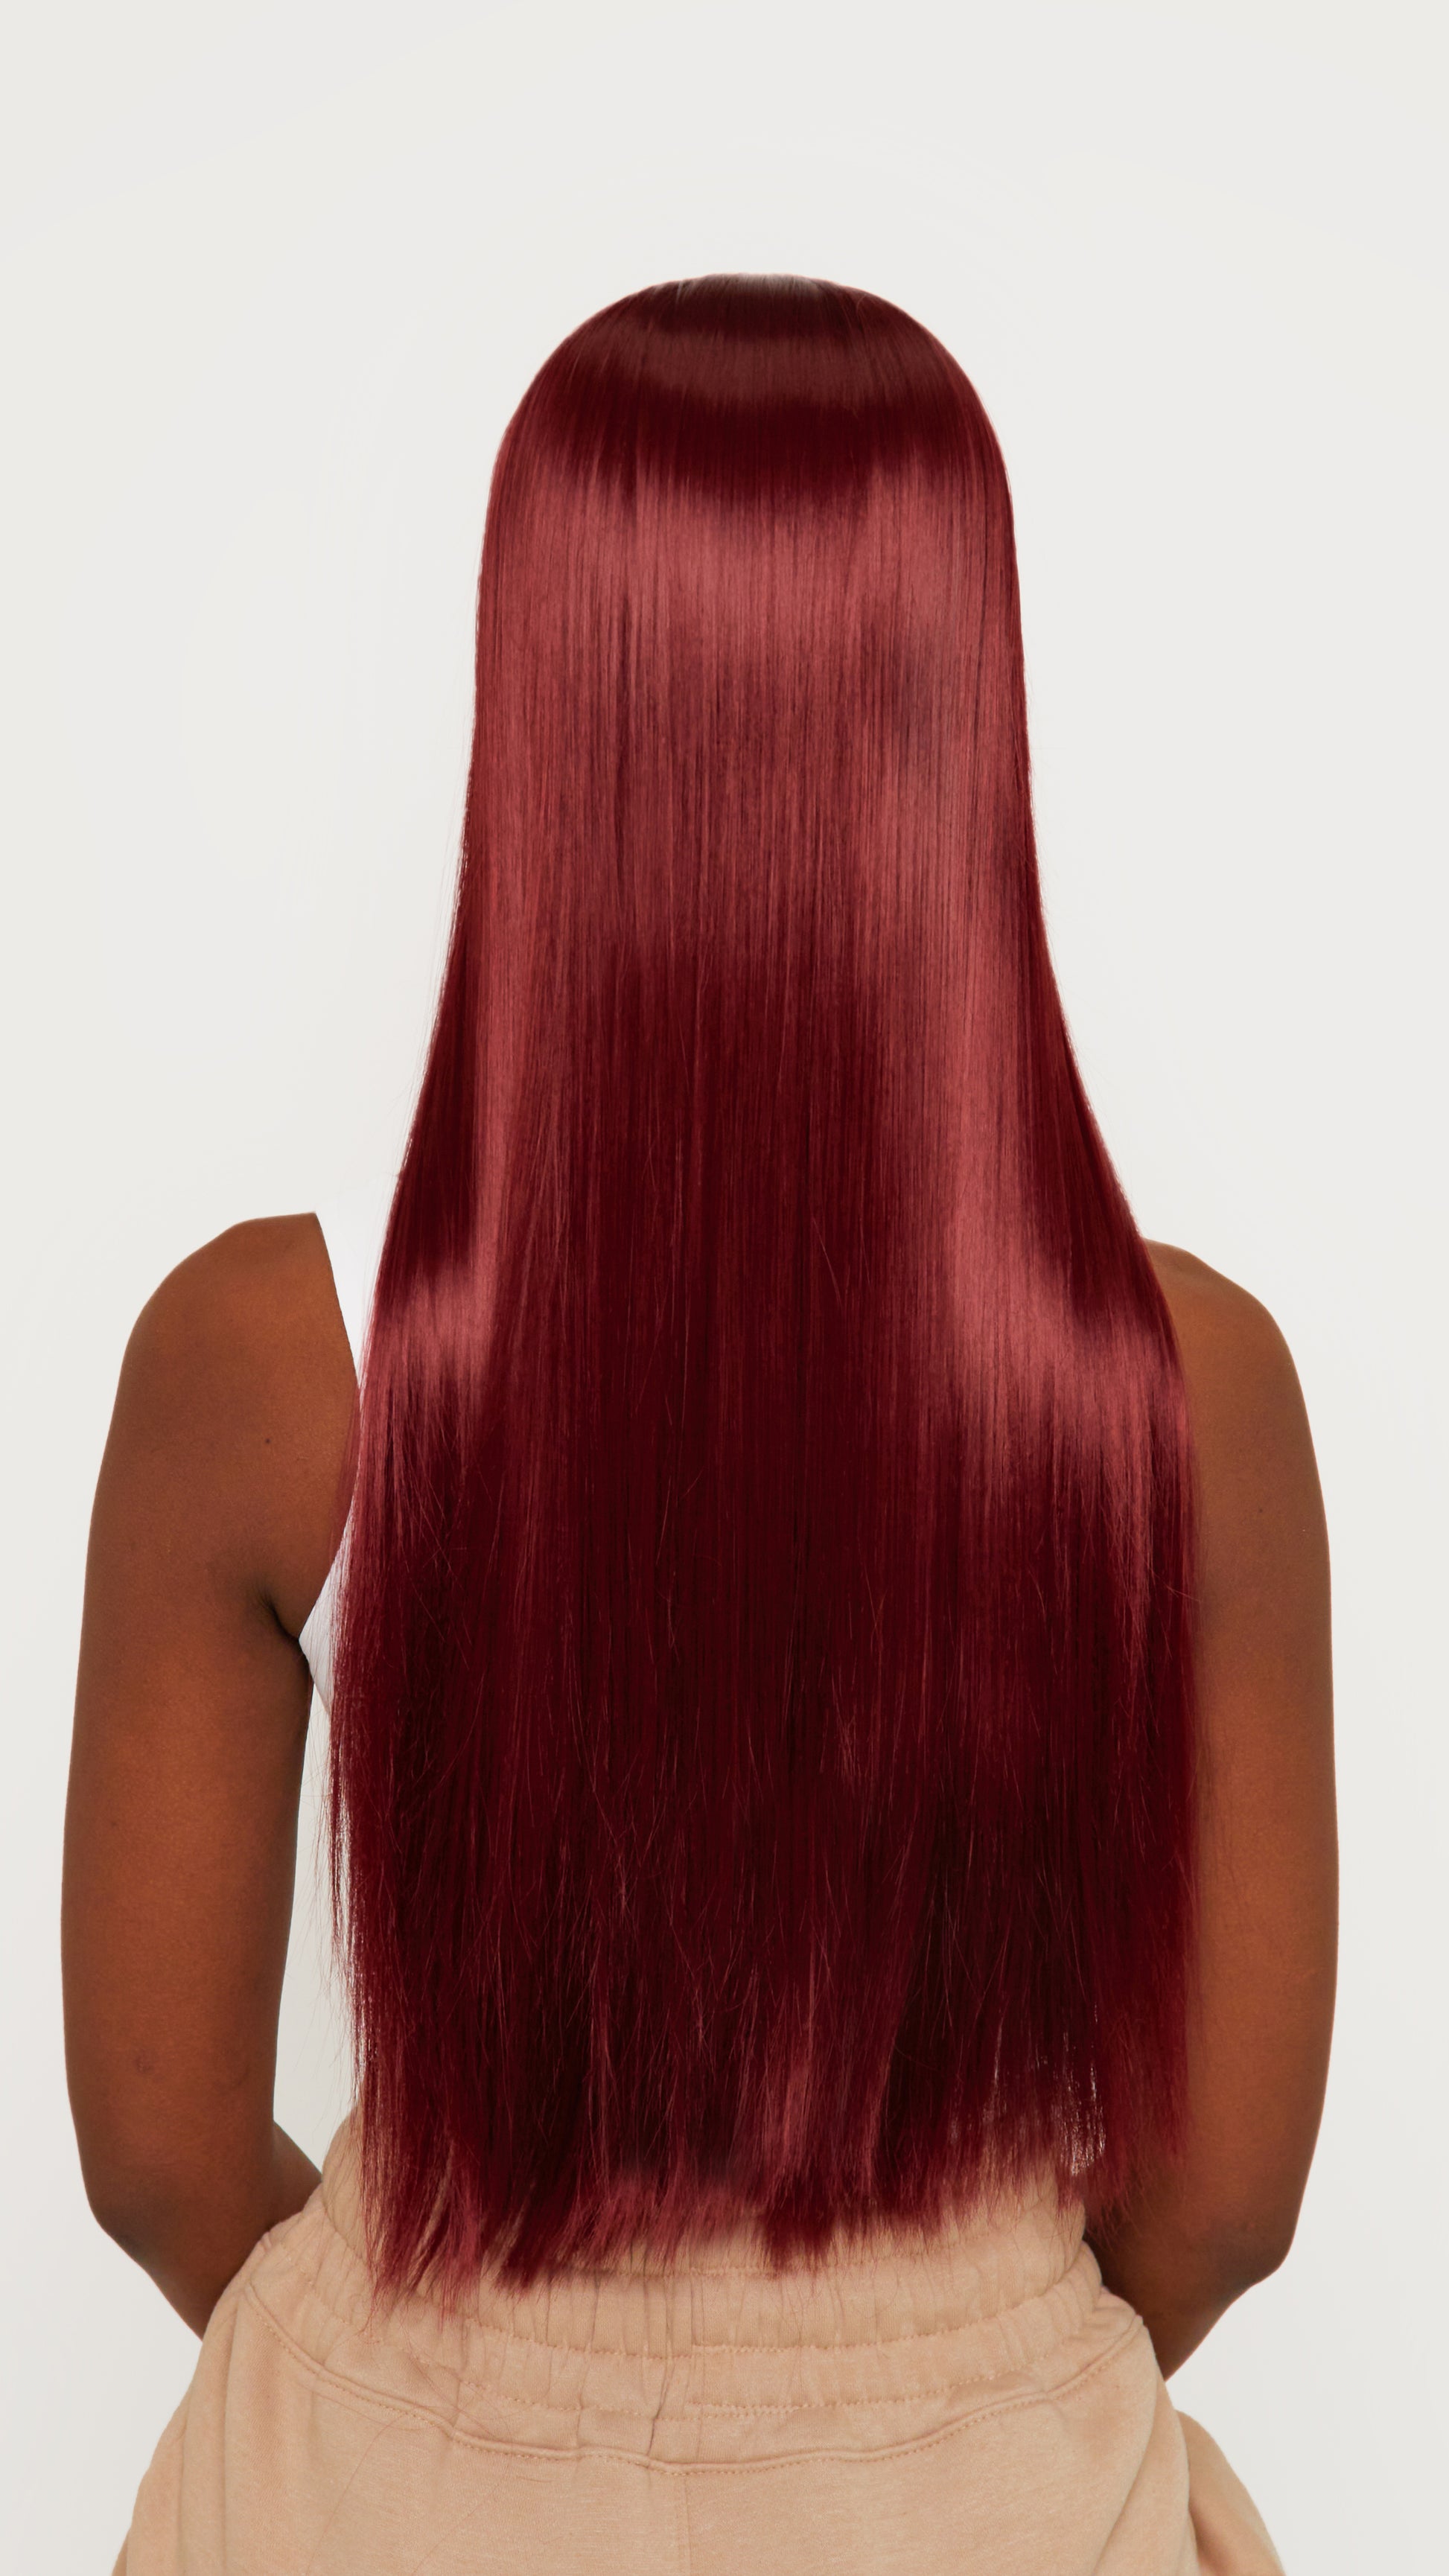 Check out our burgundy wig selection for the very best in unique or custom, handmade pieces from our wigs shops.